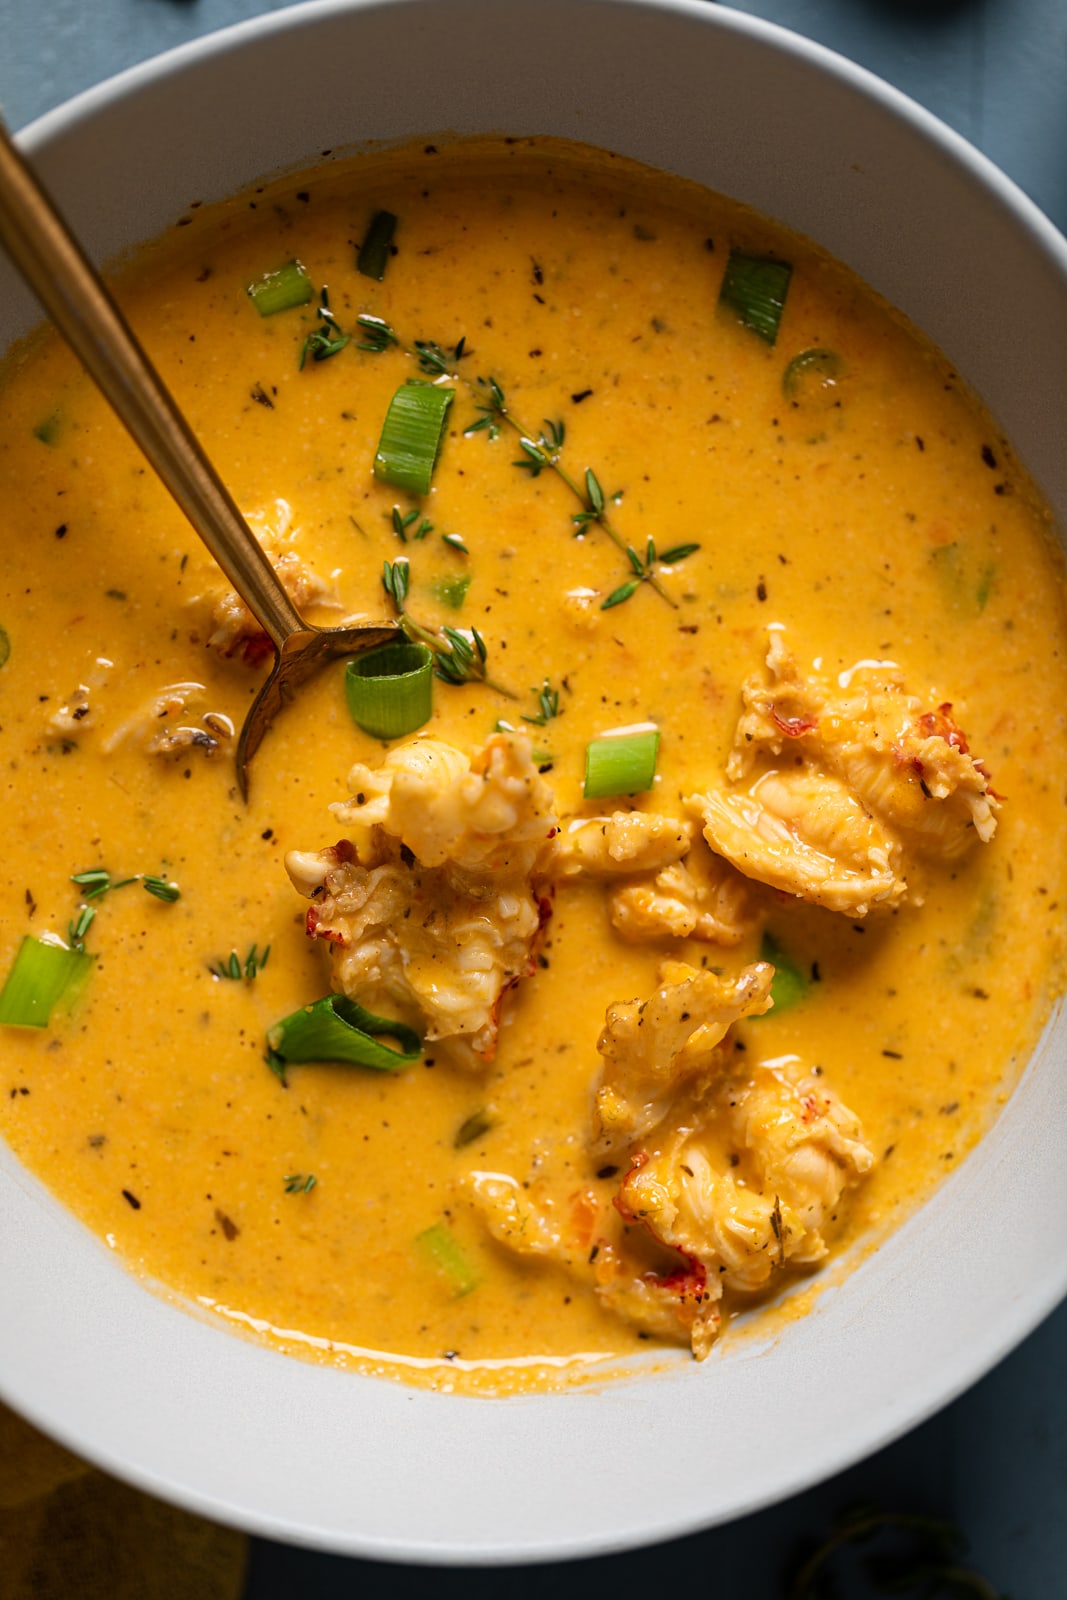 Amazing Lobster Bisque Soup Recipe